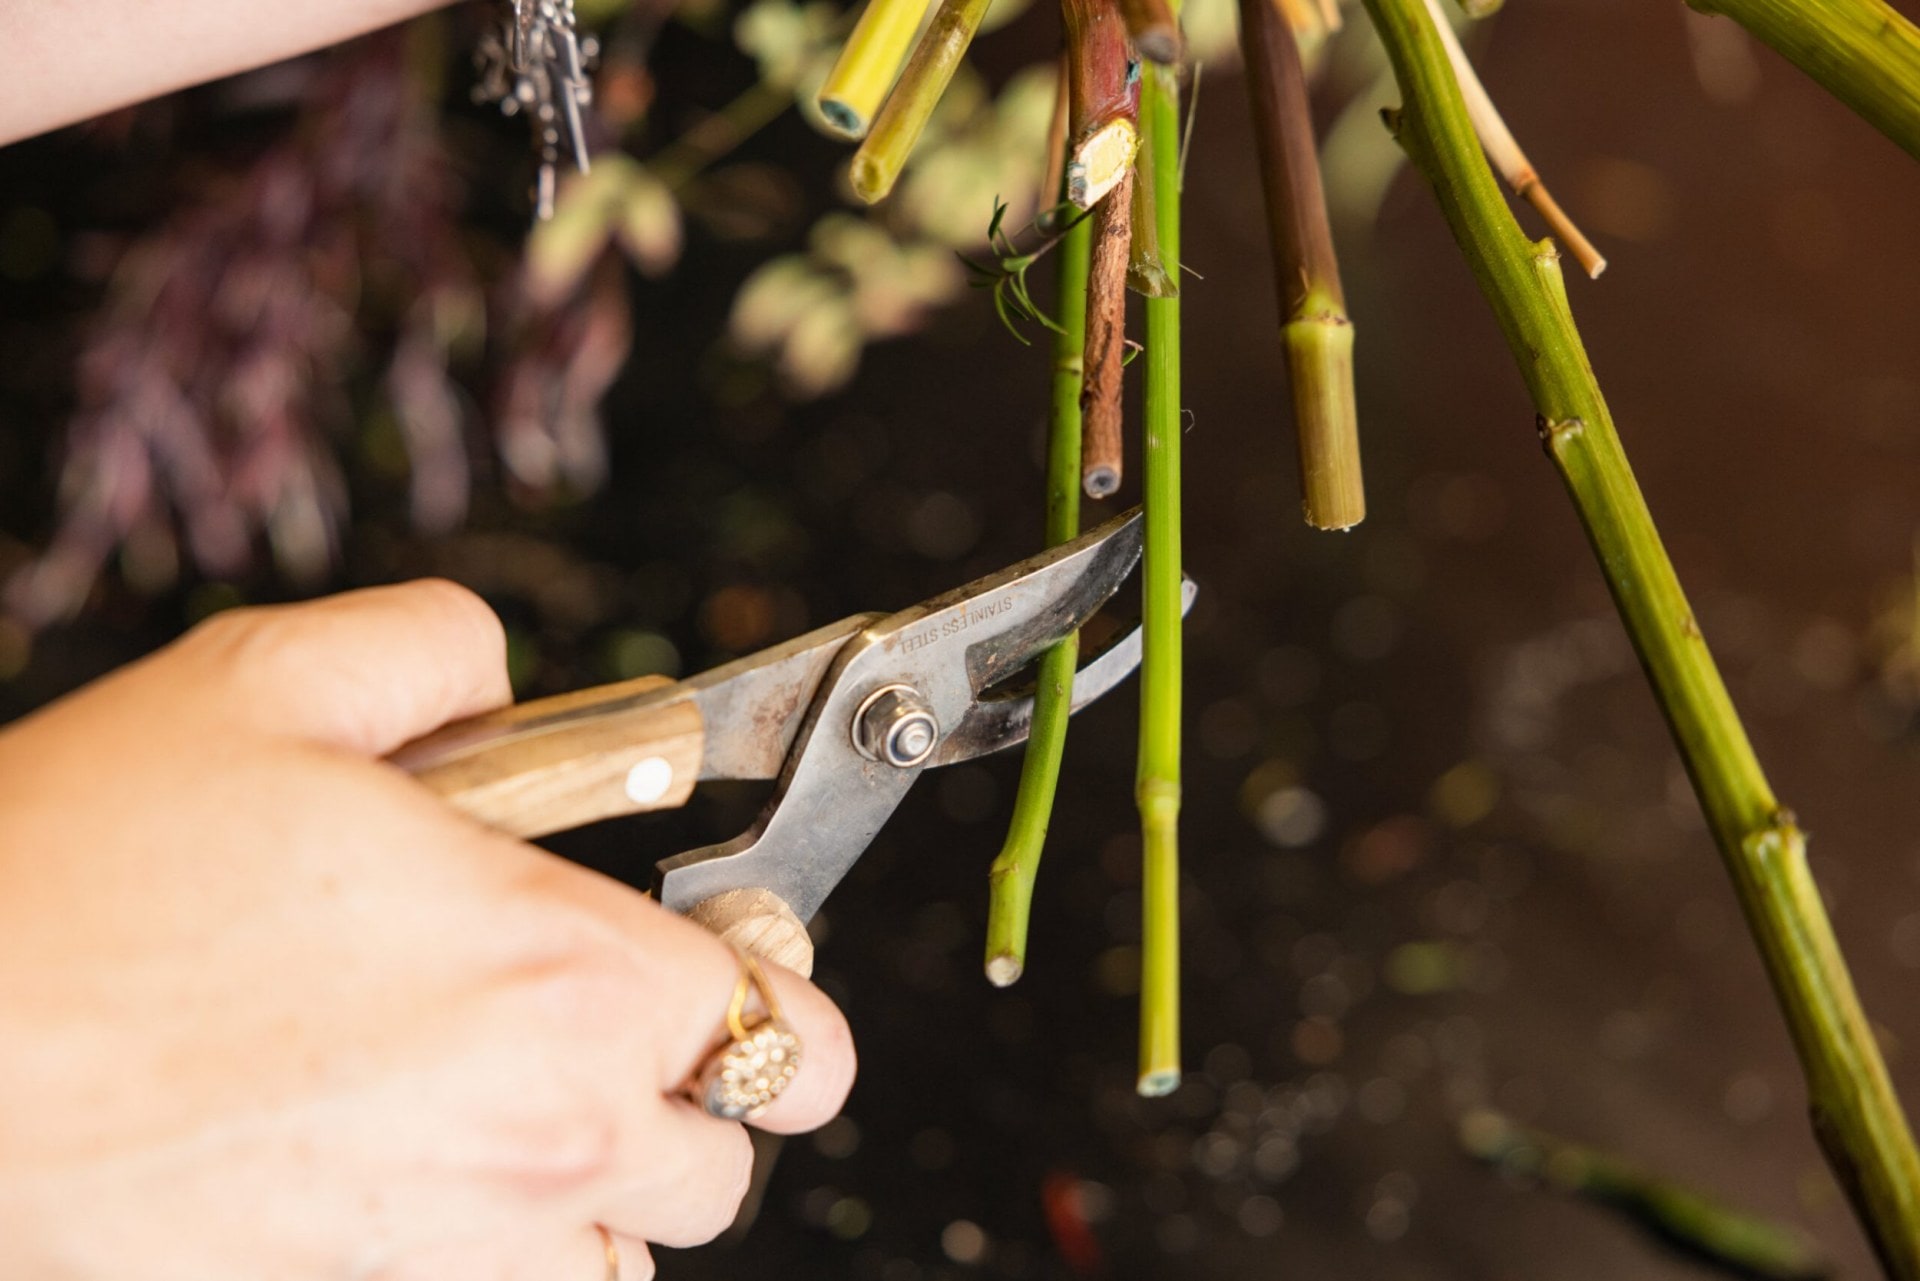 Stems of a flower being cut by gardening shears